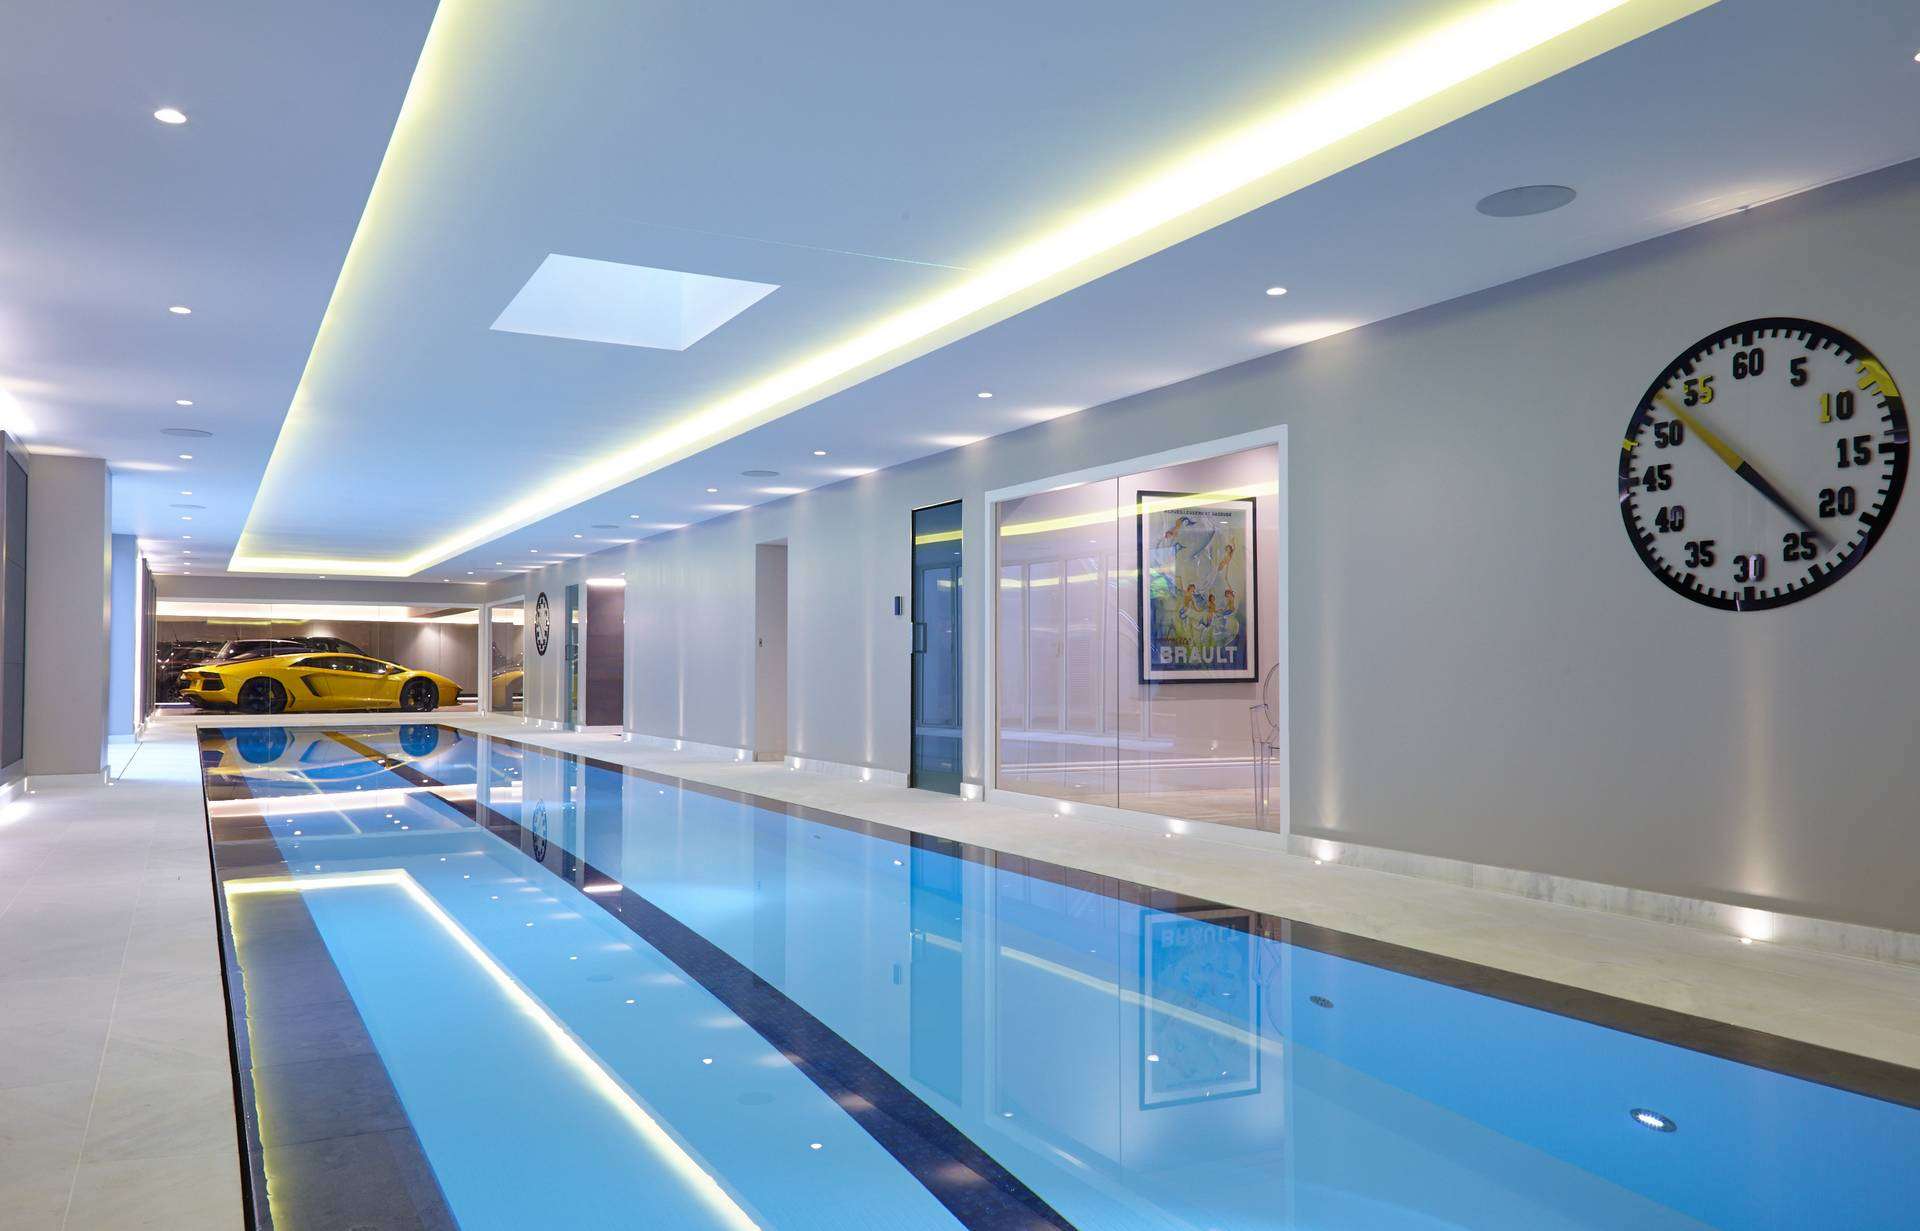 How Much Does An Indoor Swimming Pool Cost?